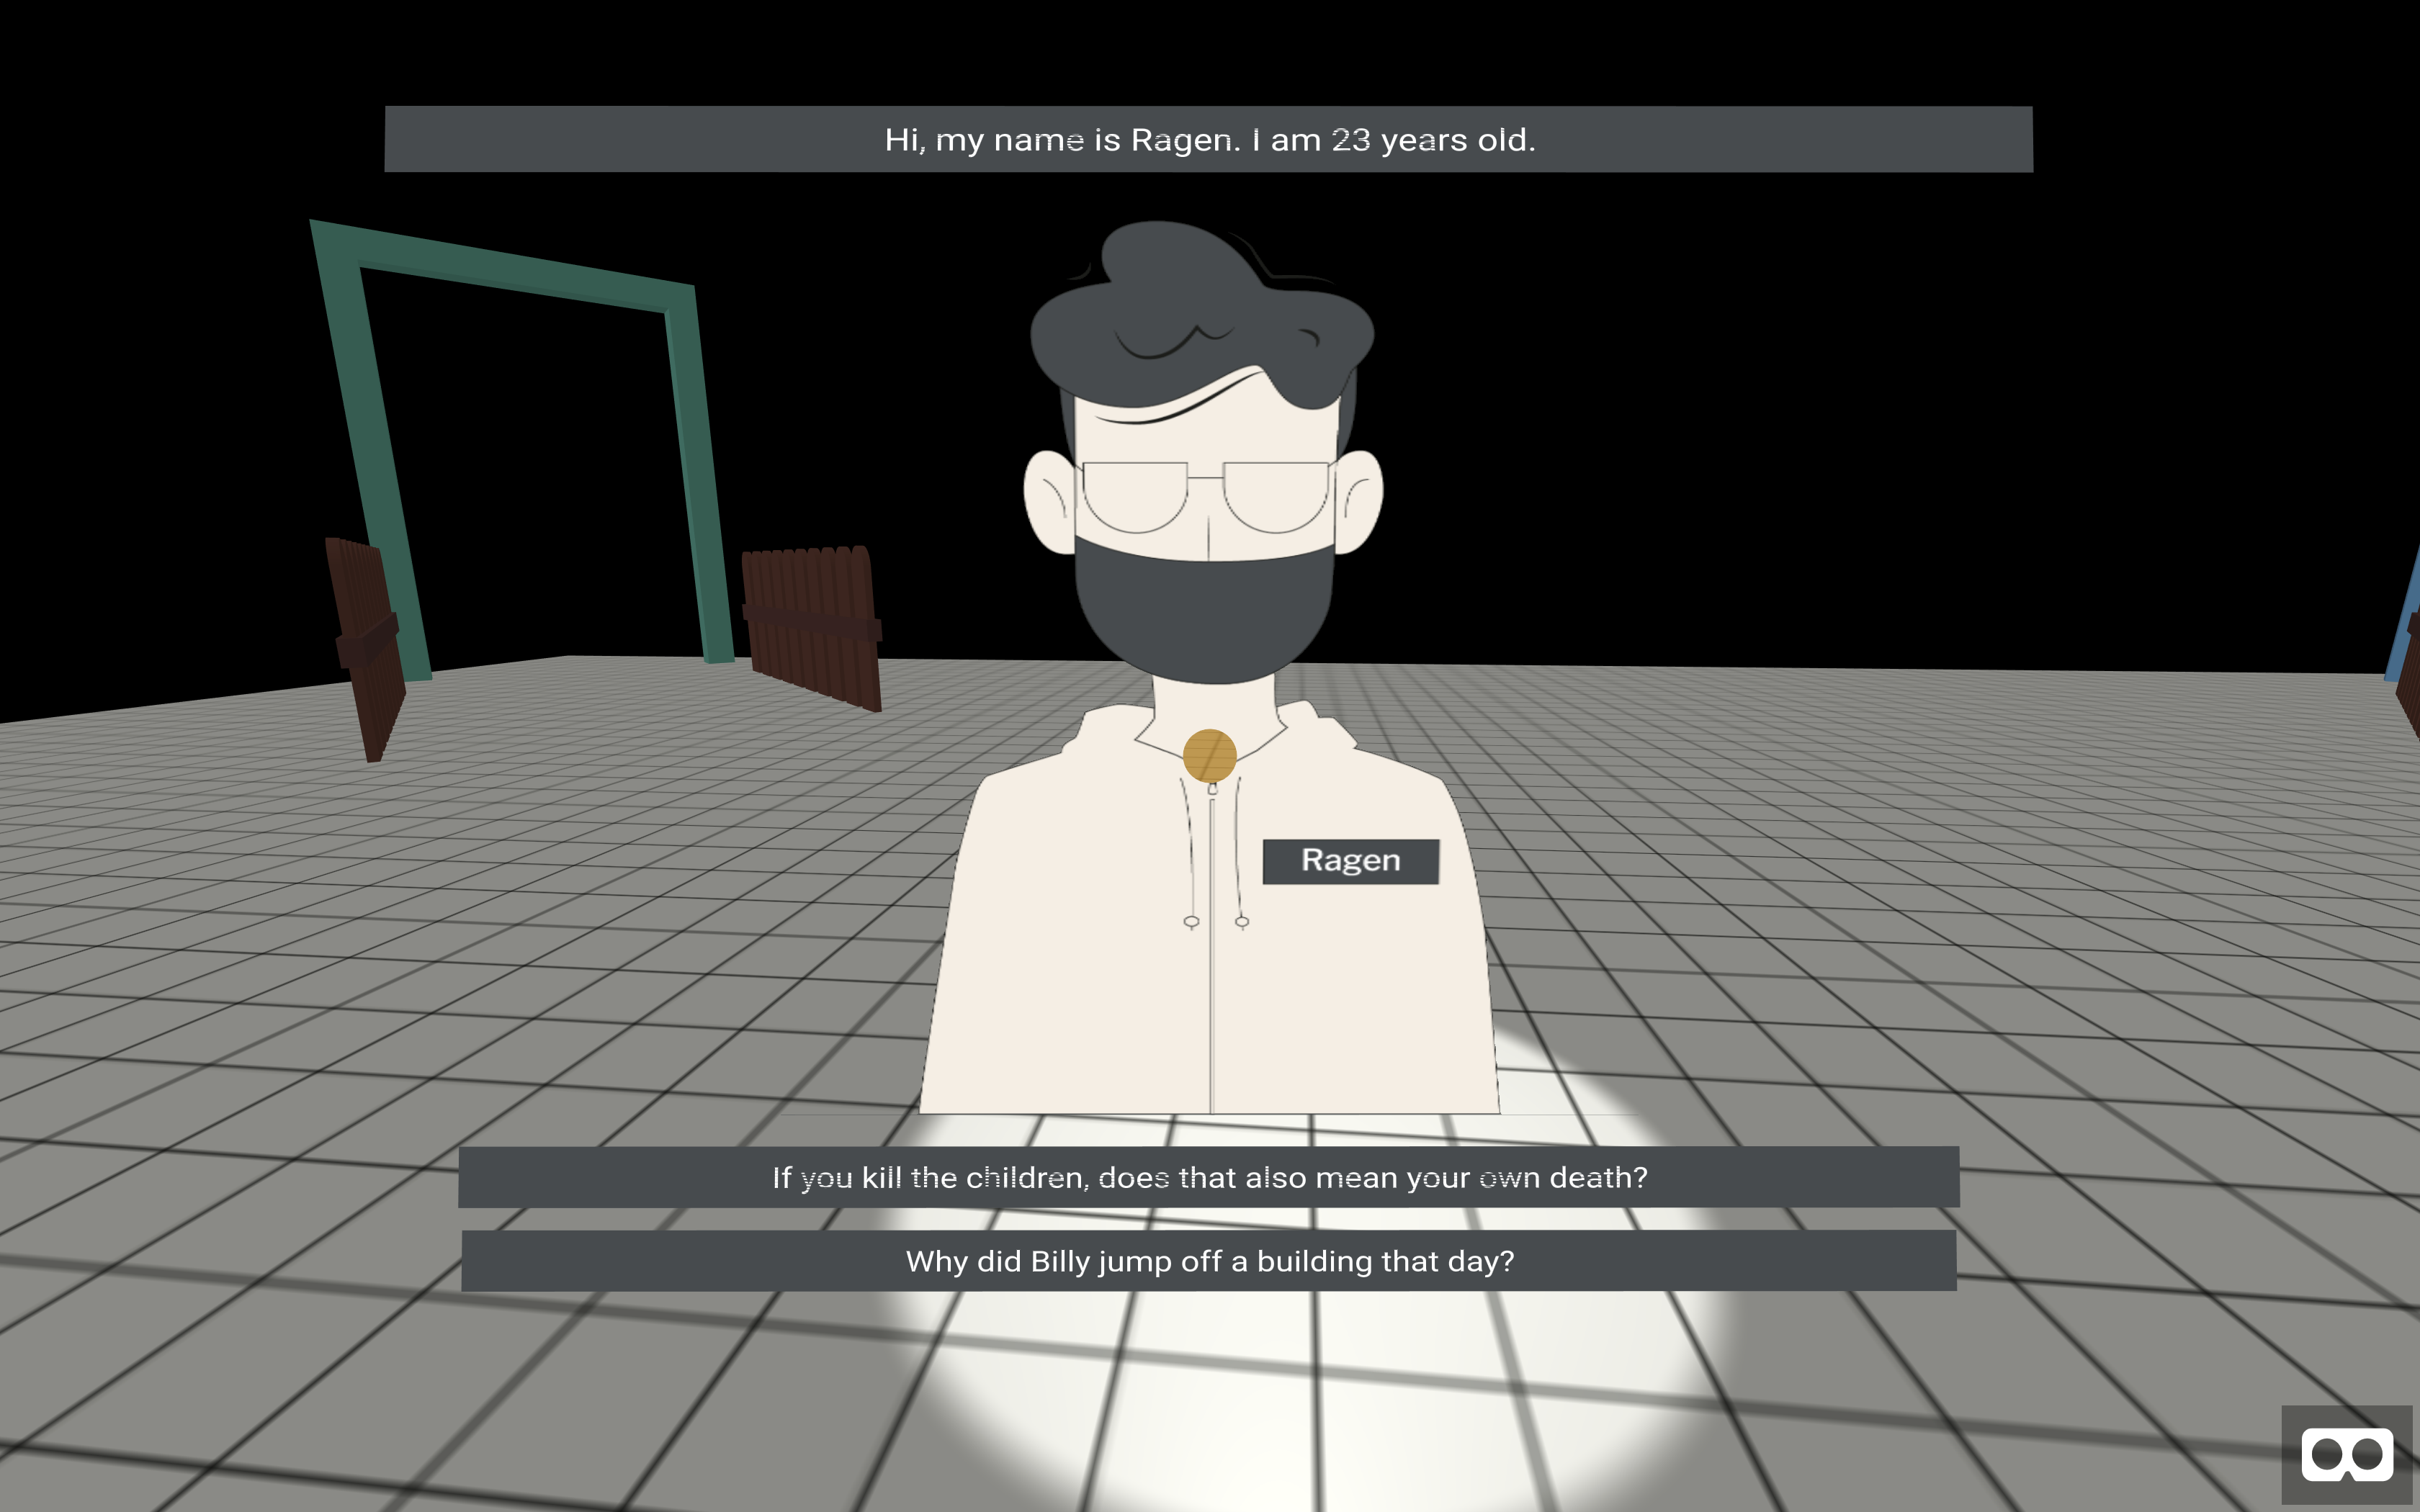 Ragen's image with dialogue box and two option-boxes